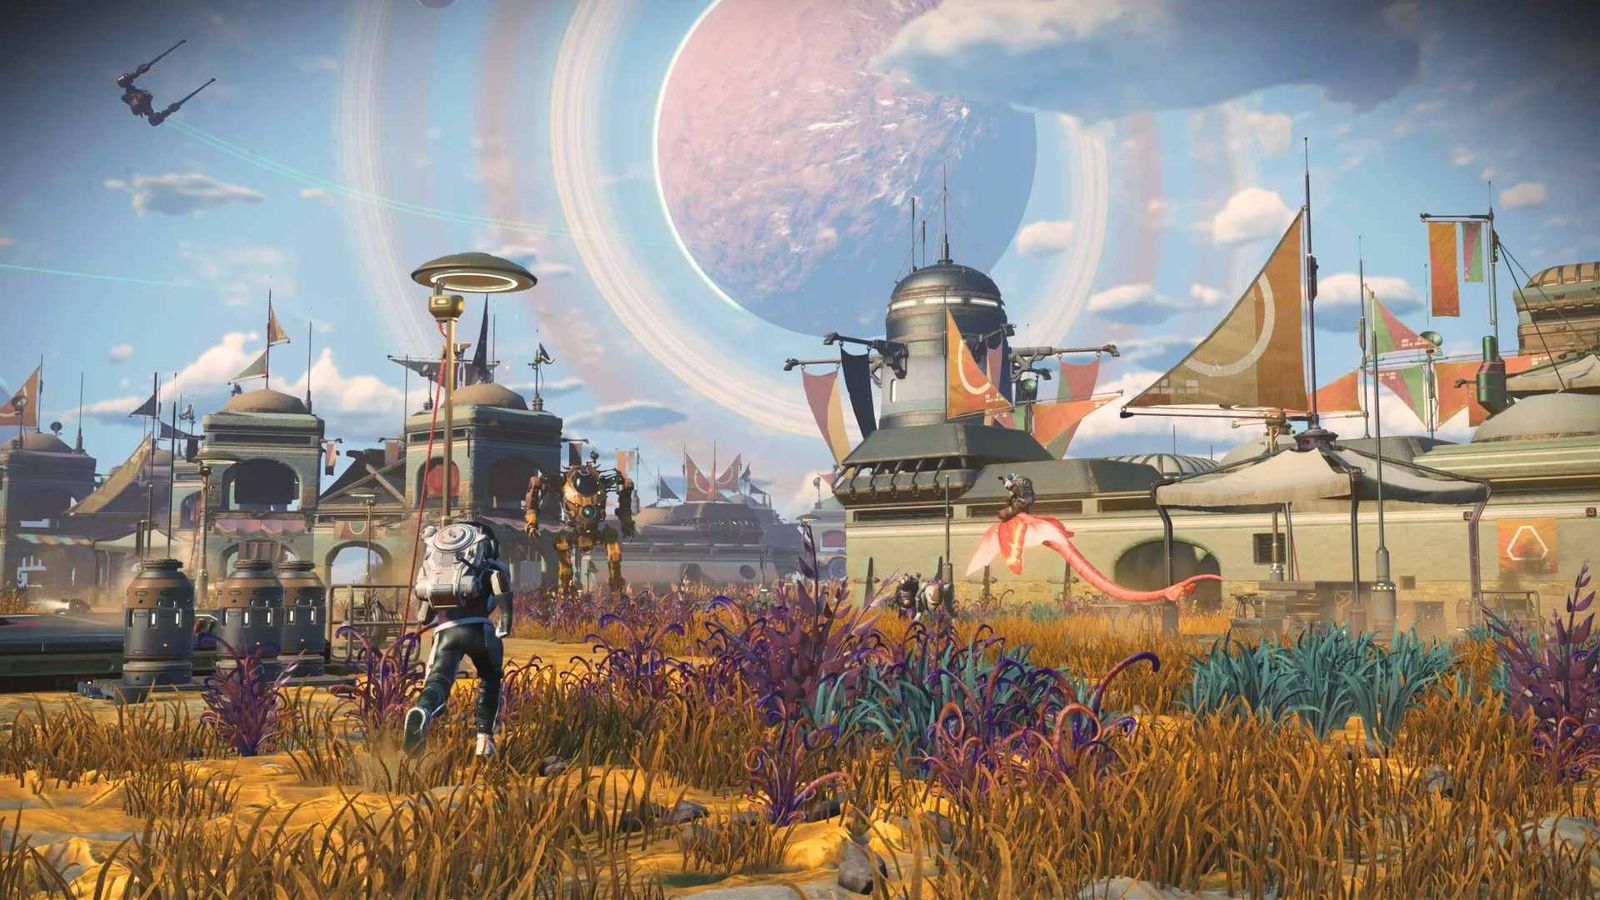 A bright landscape on a planet in No Man's Sky